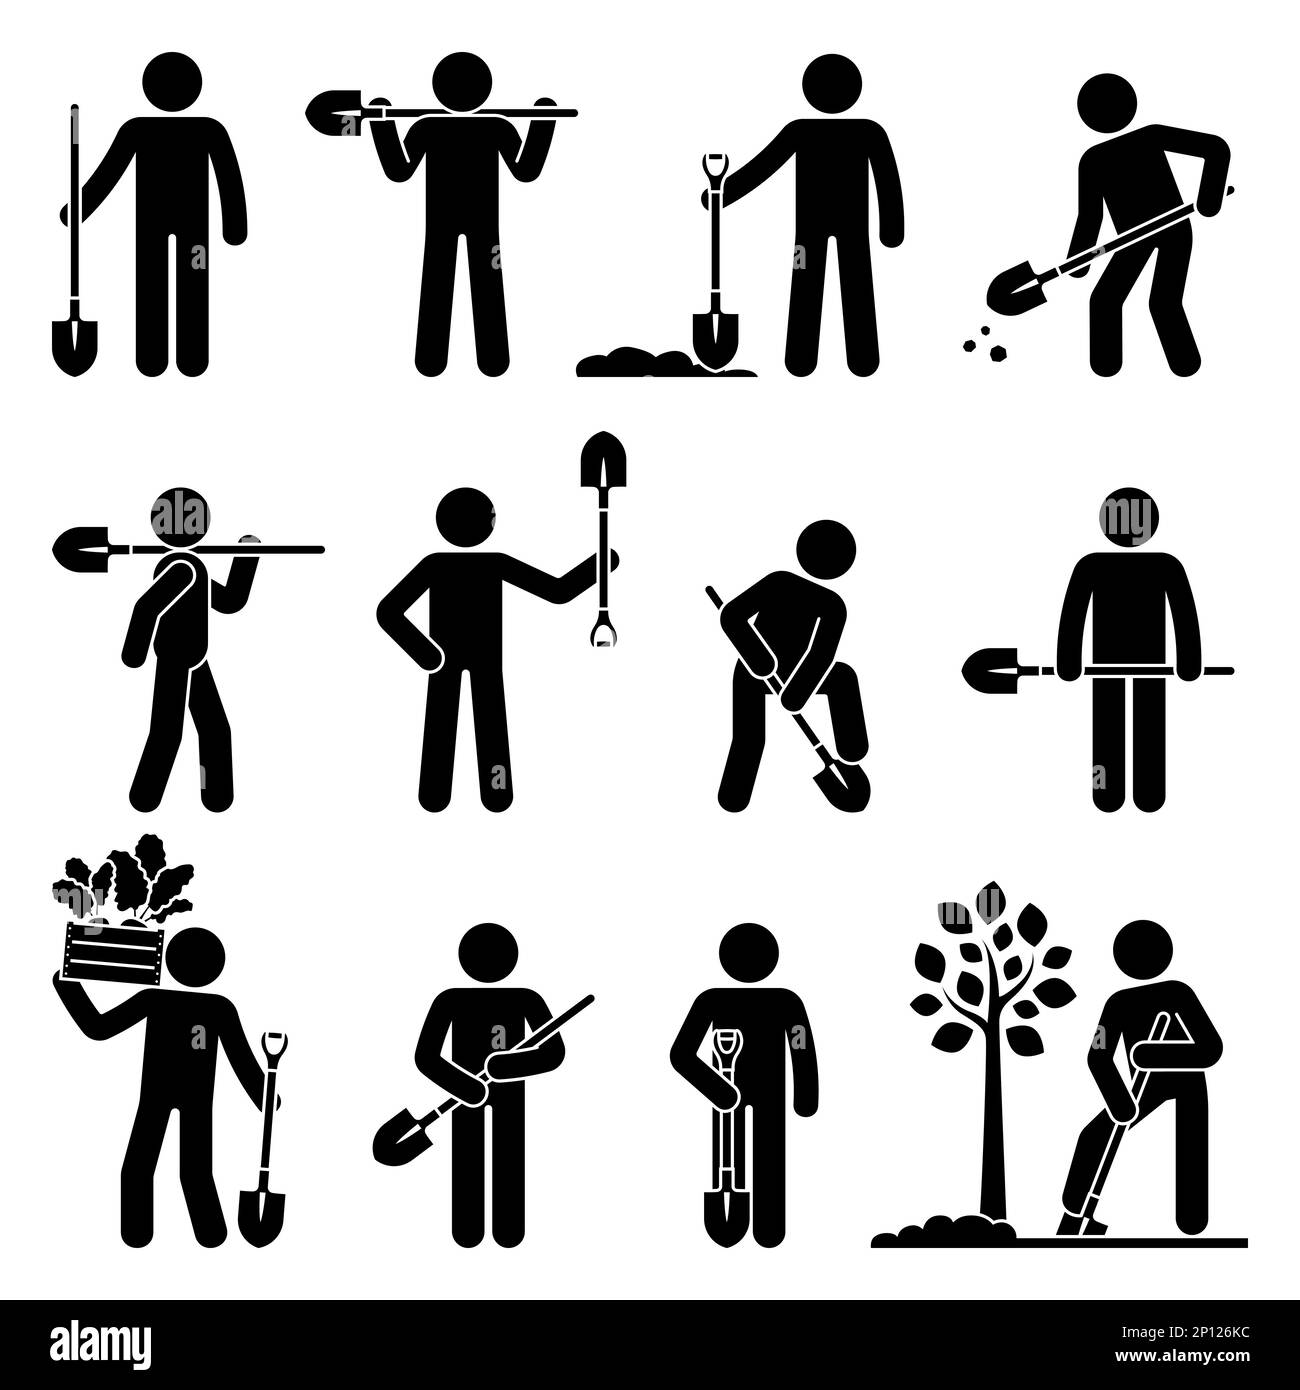 Stick figure man standing with shovel vector illustration set. Stickman digging ground, planting tree, gathering harvest icon silhouette pictogram Stock Vector